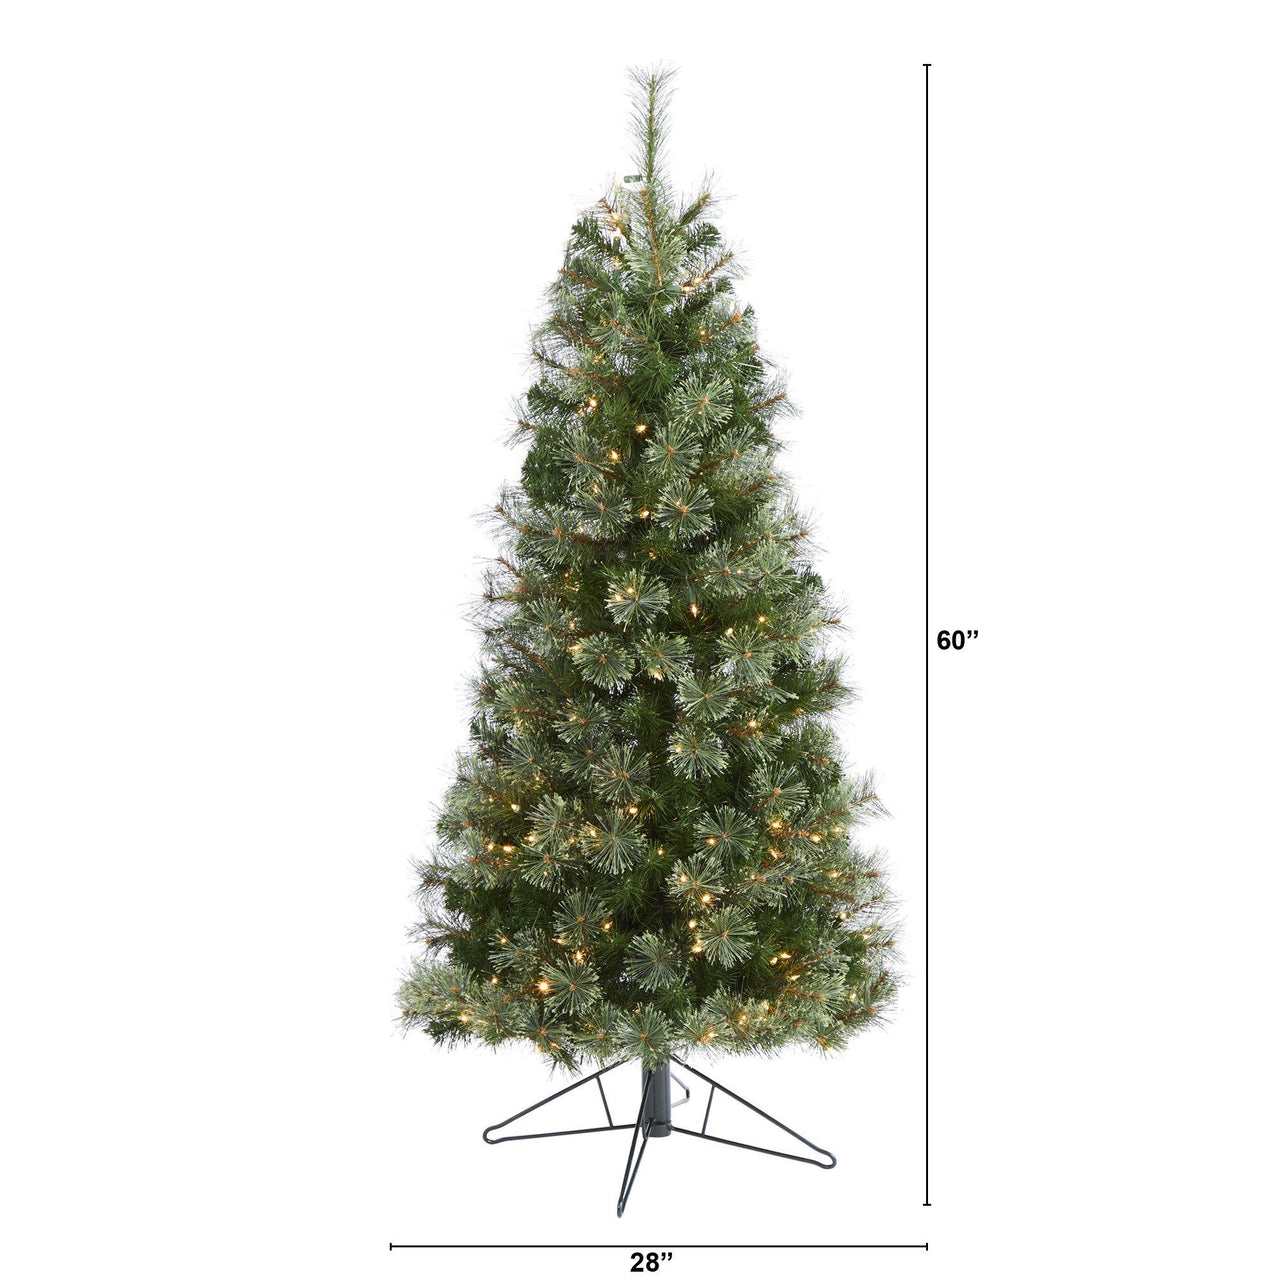 5' Cashmere Slim Artificial Christmas Tree with 250 Warm White Lights and 408 Bendable Branches - The Fox Decor